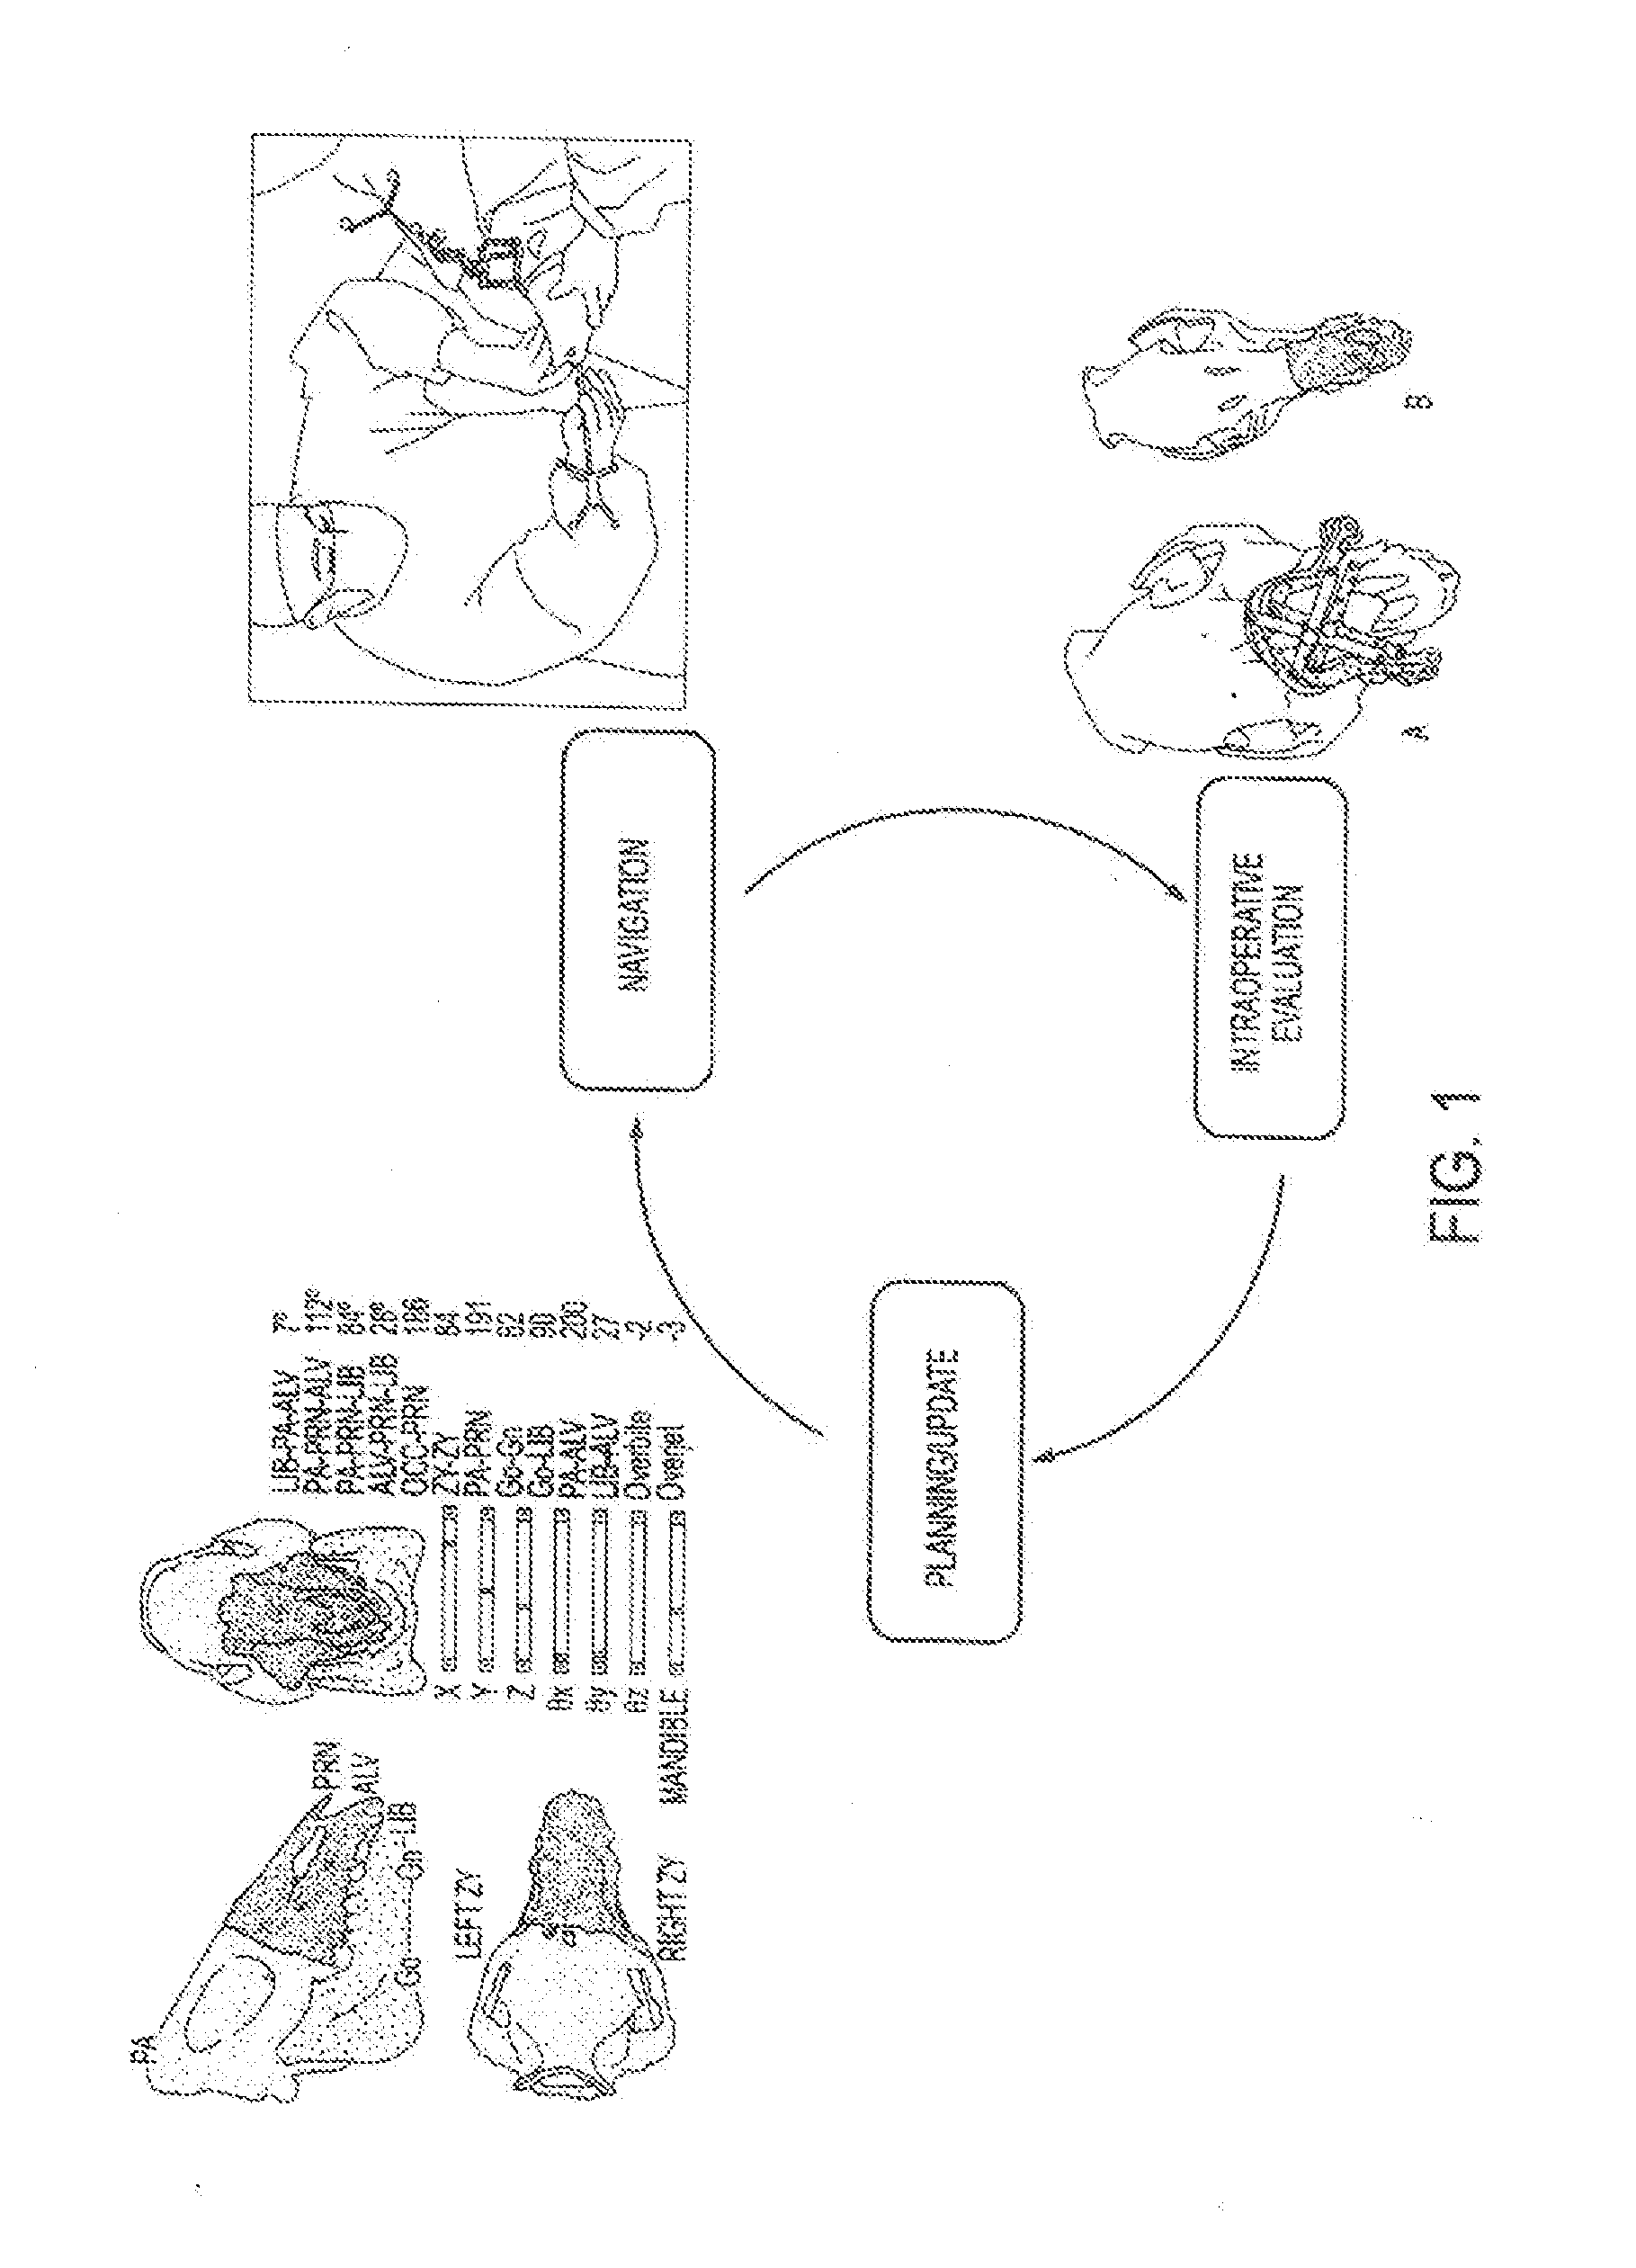 Computer-assisted planning and execution system